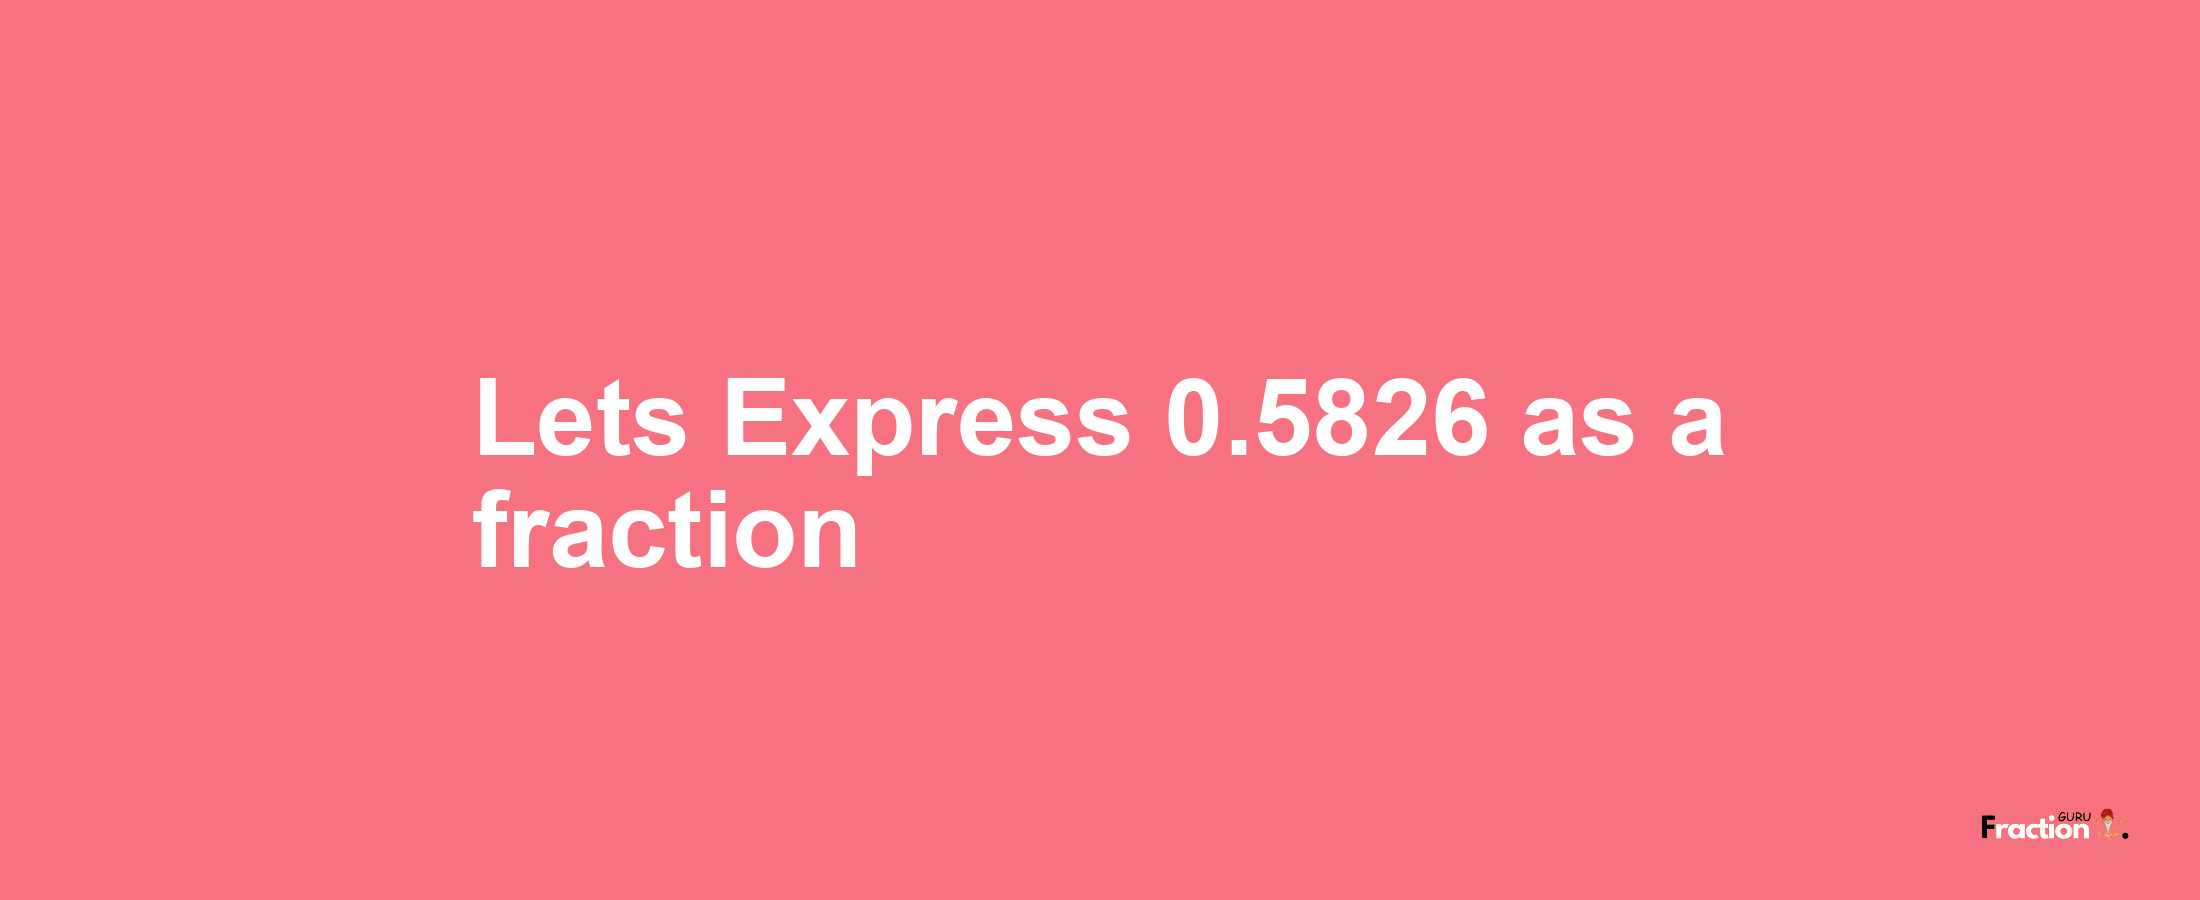 Lets Express 0.5826 as afraction